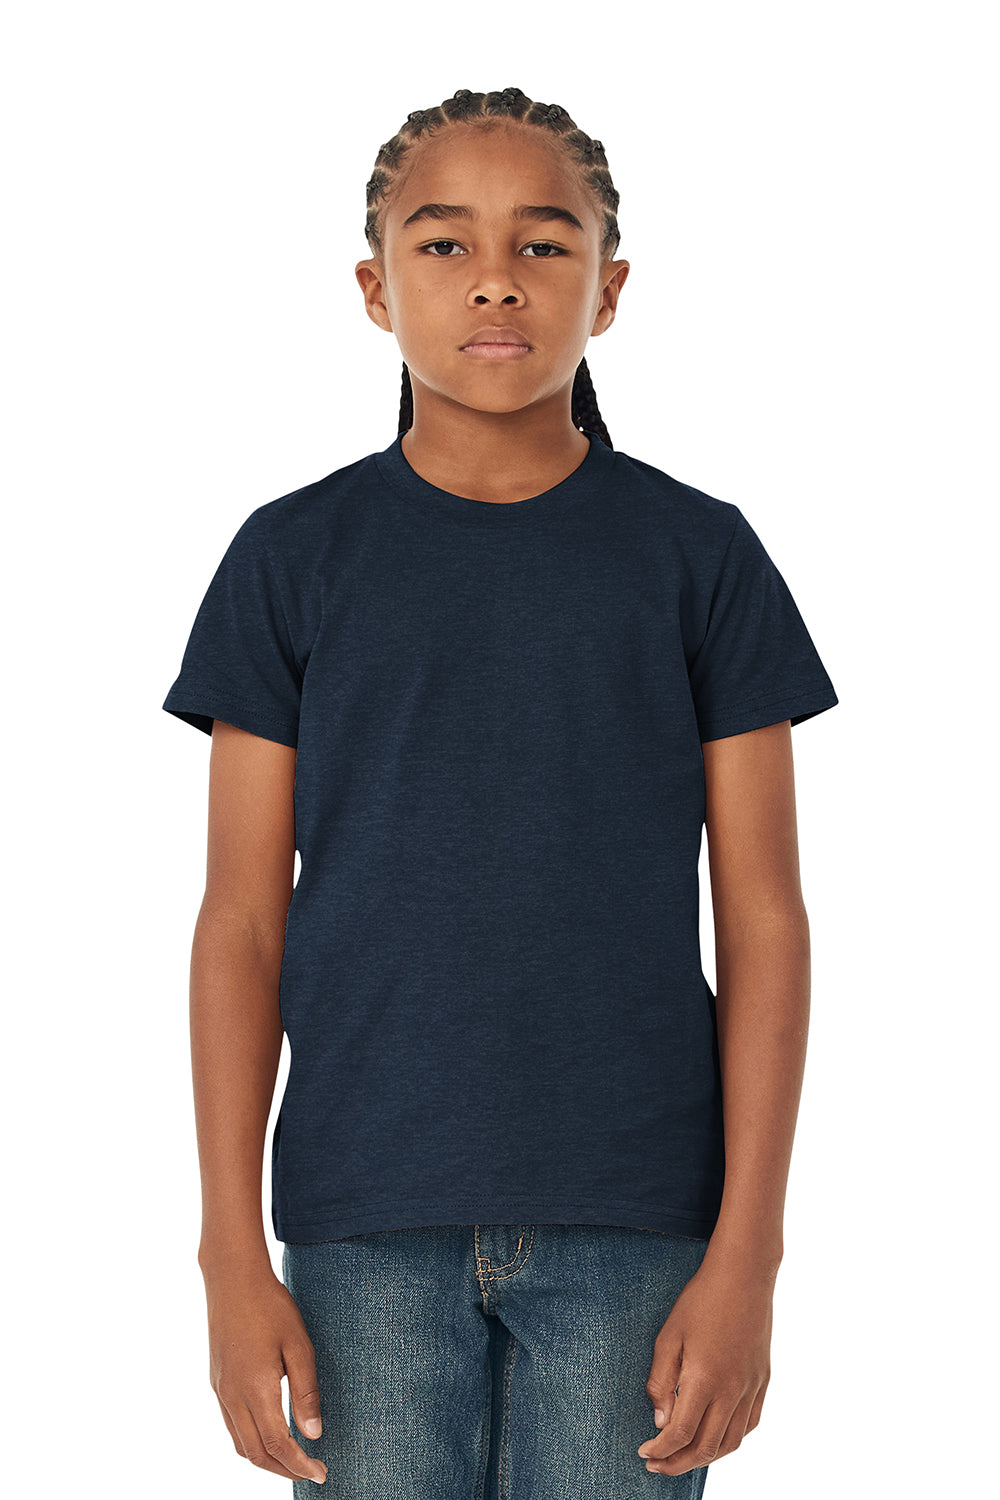 Bella + Canvas 3001Y Youth Jersey Short Sleeve Crewneck T-Shirt Heather Navy Blue Model Front